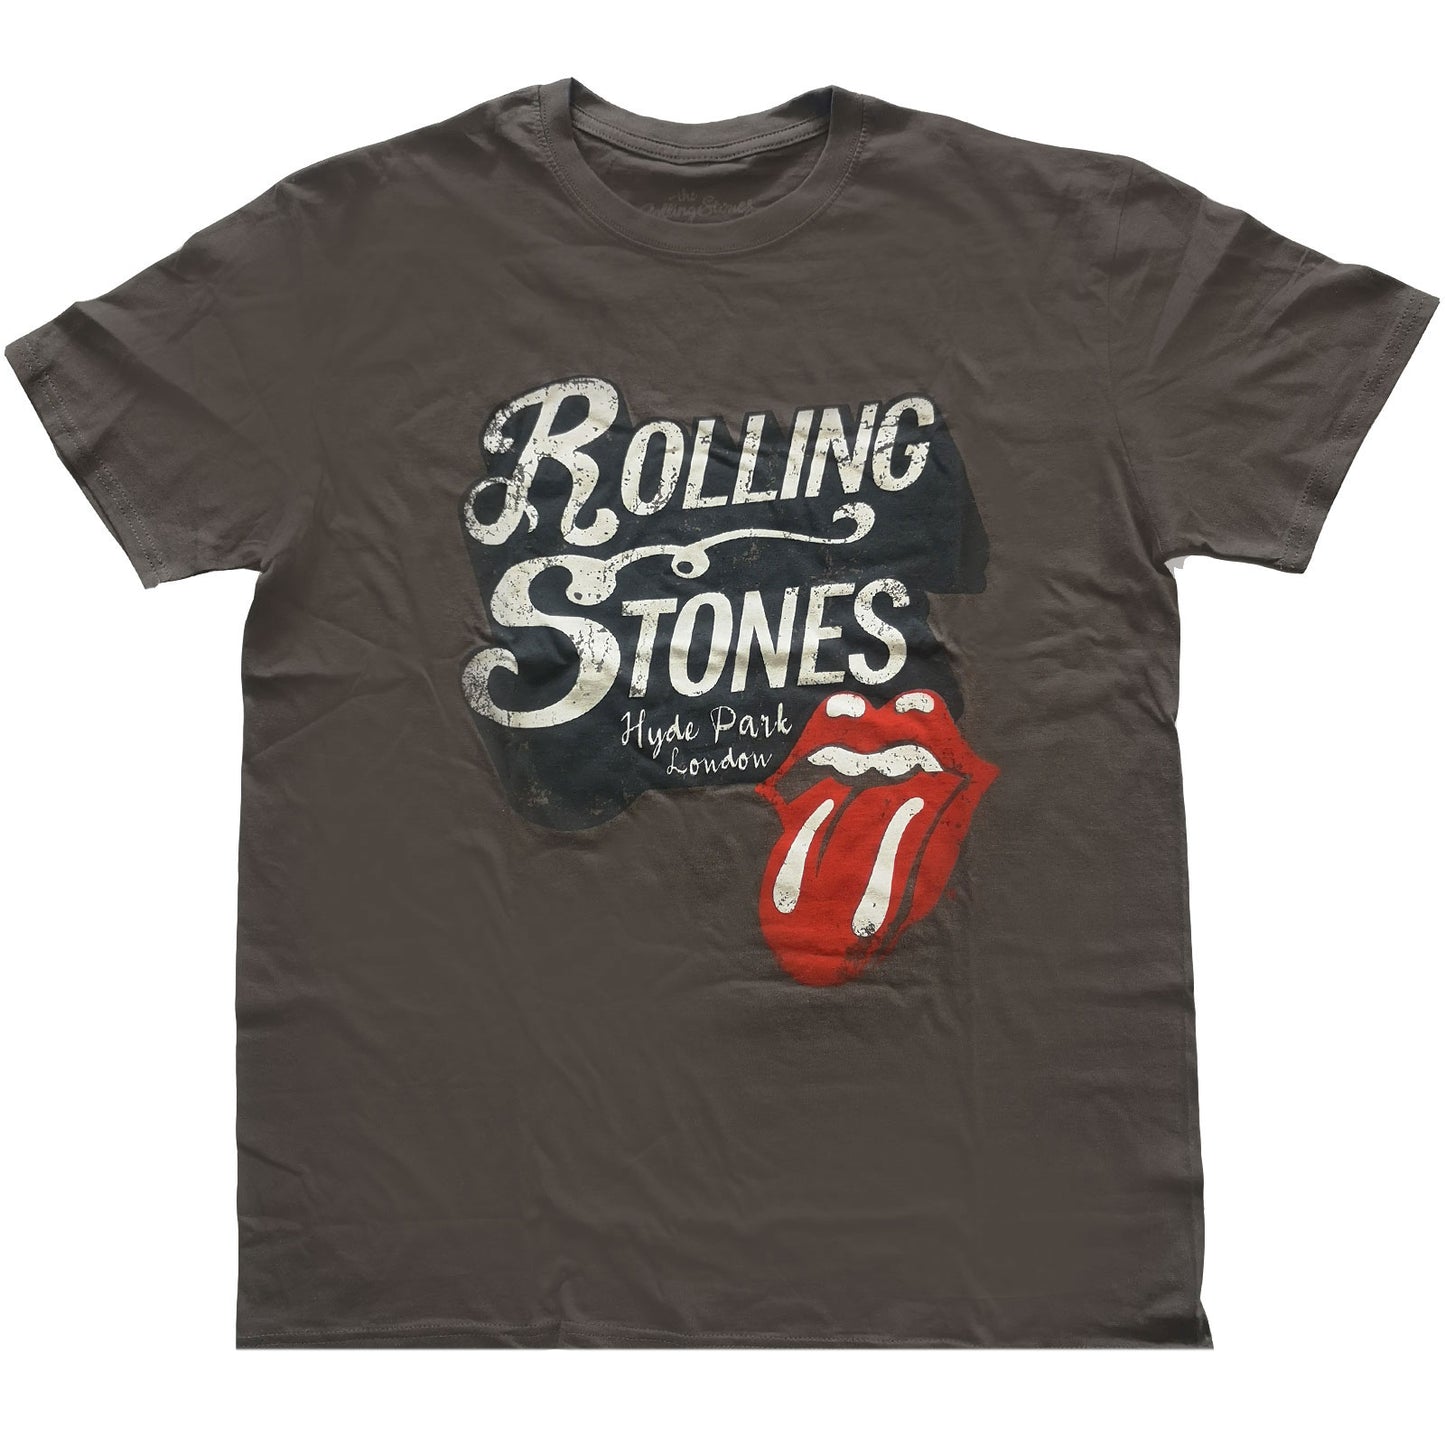 The Rolling Stones T-Shirt: Hyde Park